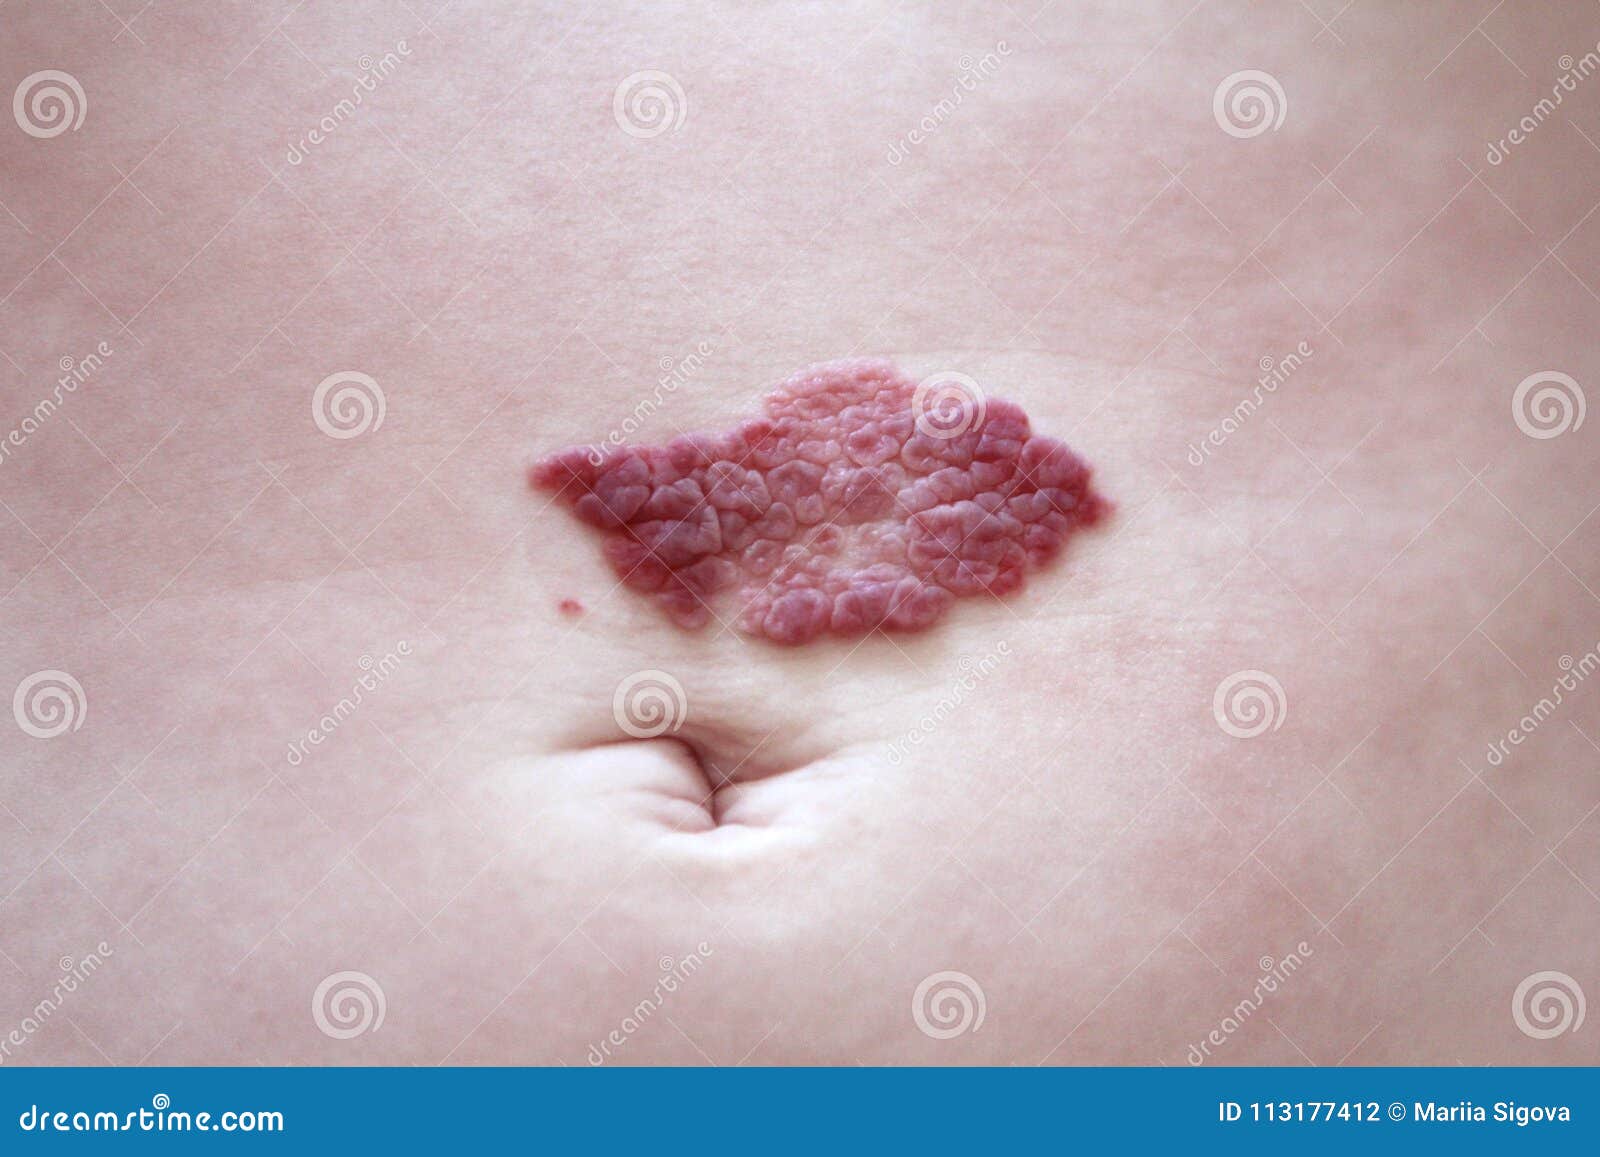 capillary hemangioma regression. red birthmark on the baby`s belly after treatment